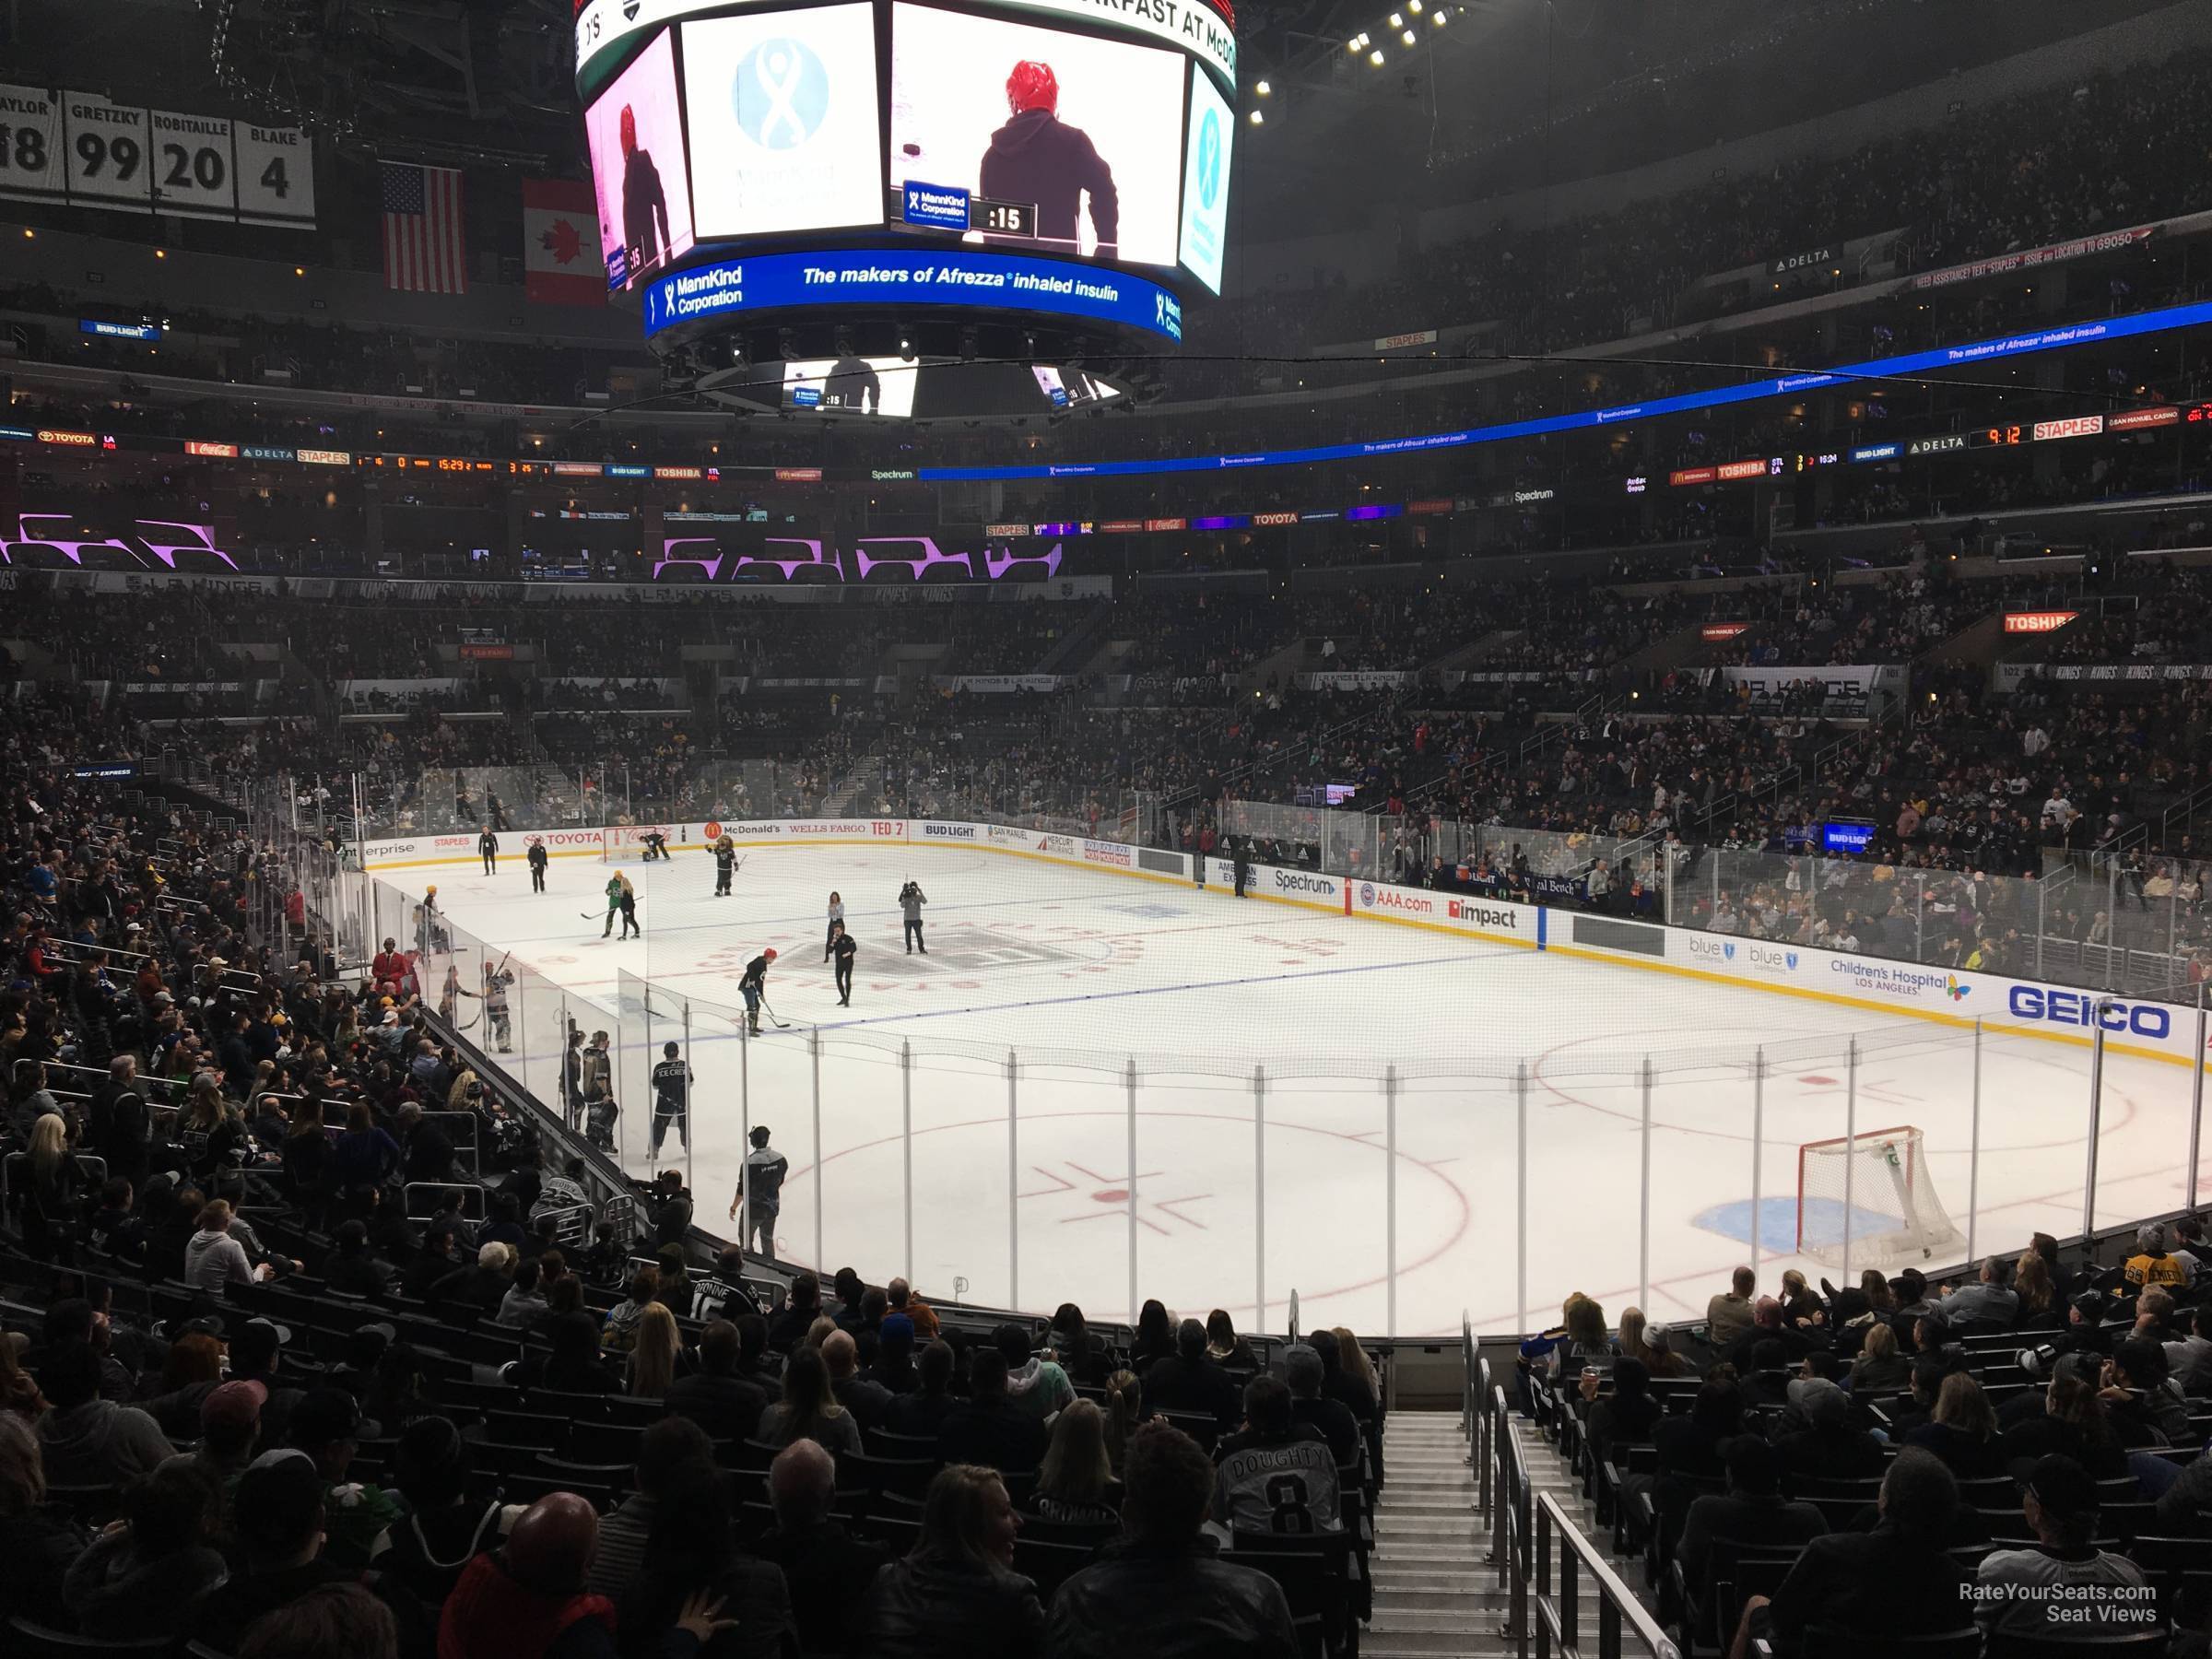 section 108, row 20 seat view  for hockey - crypto.com arena